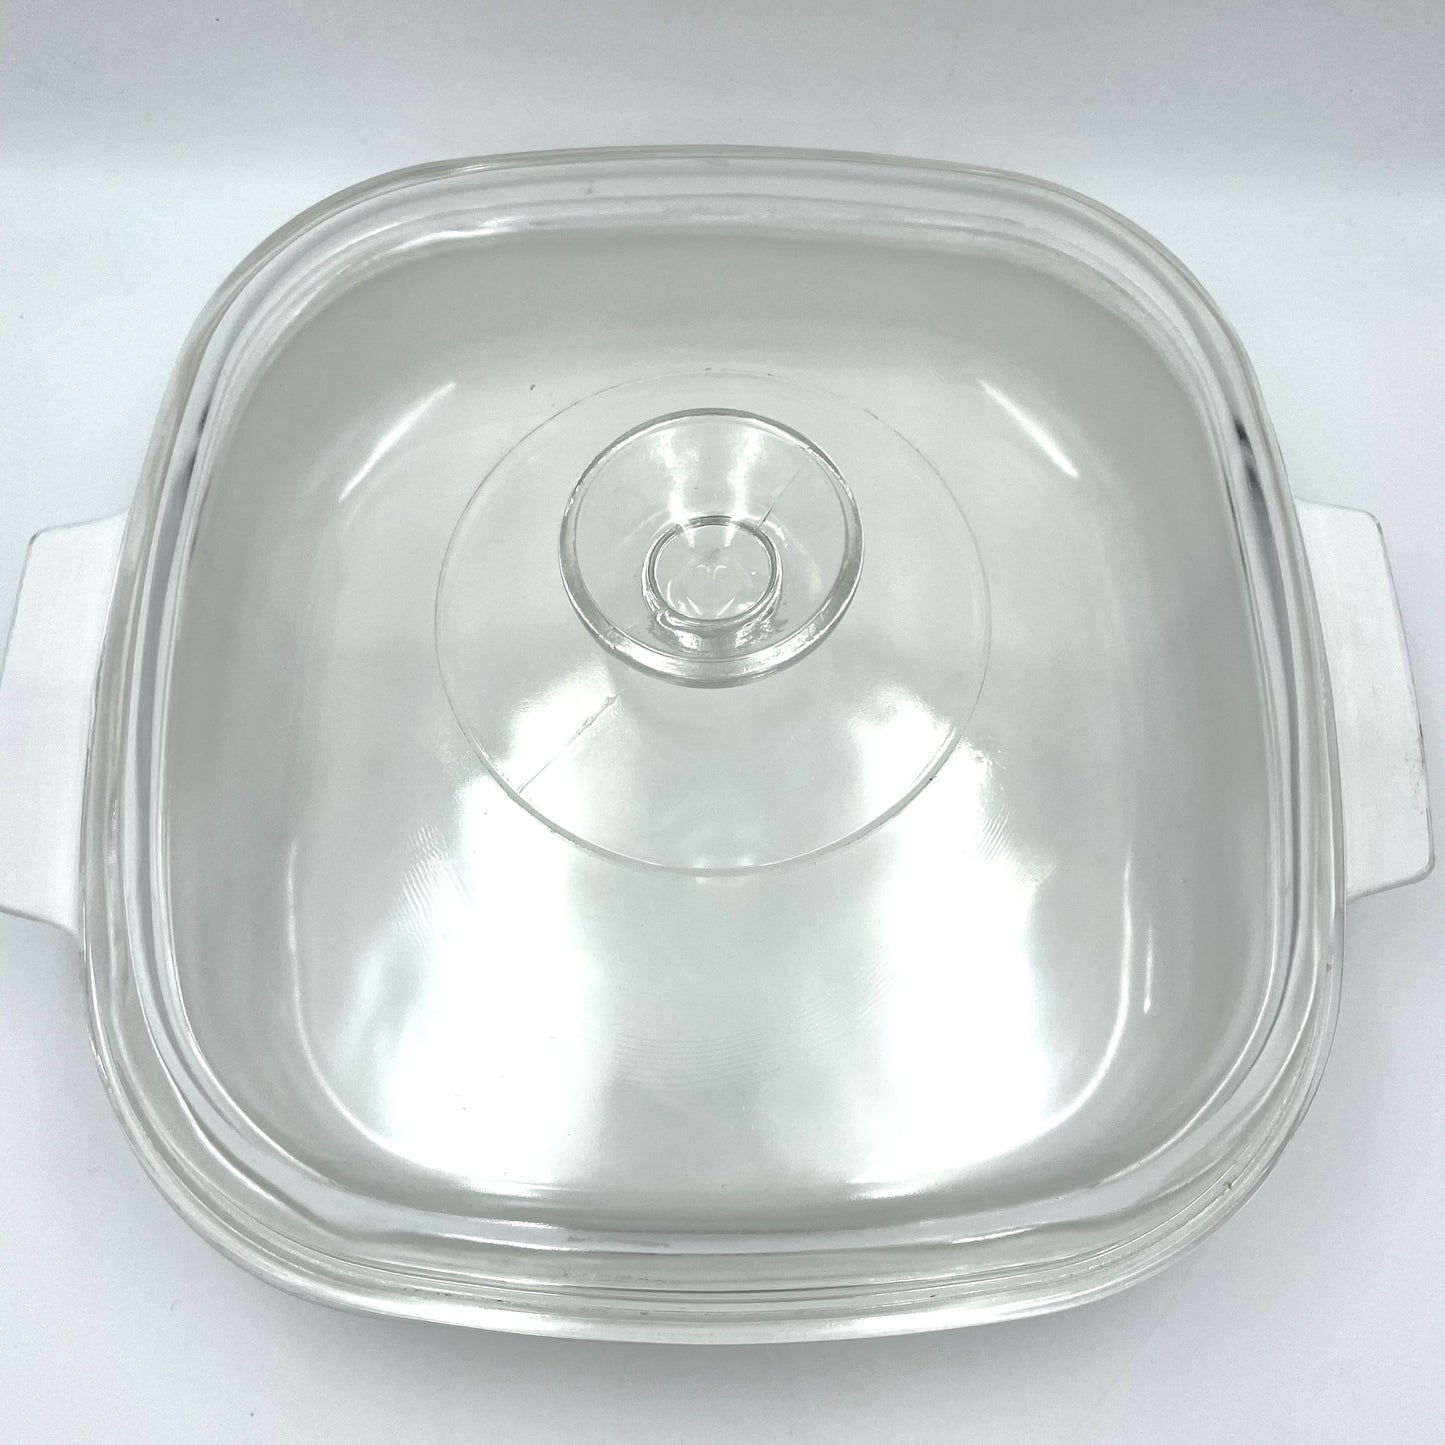 Corning Ware 'Spice of Life' A 3 B Casserole and Lid - 26cm